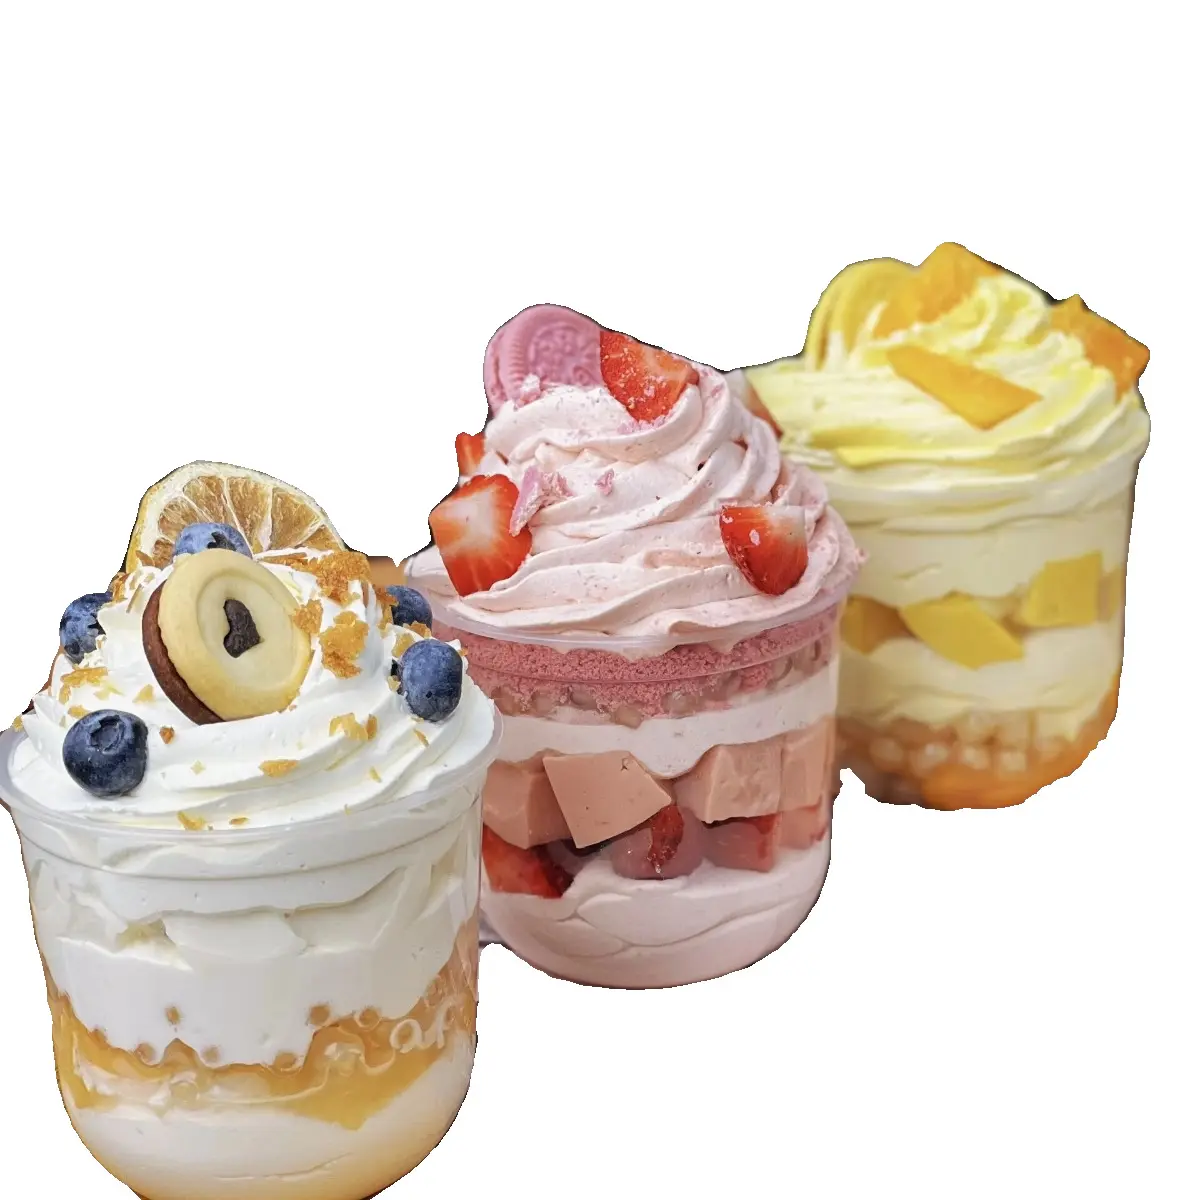 Clear Plastic Parfait Cold Cups With Lids For Yogurt Fruit Dessert Cups With Insert Pudding Ice Cream Yogurt Cup